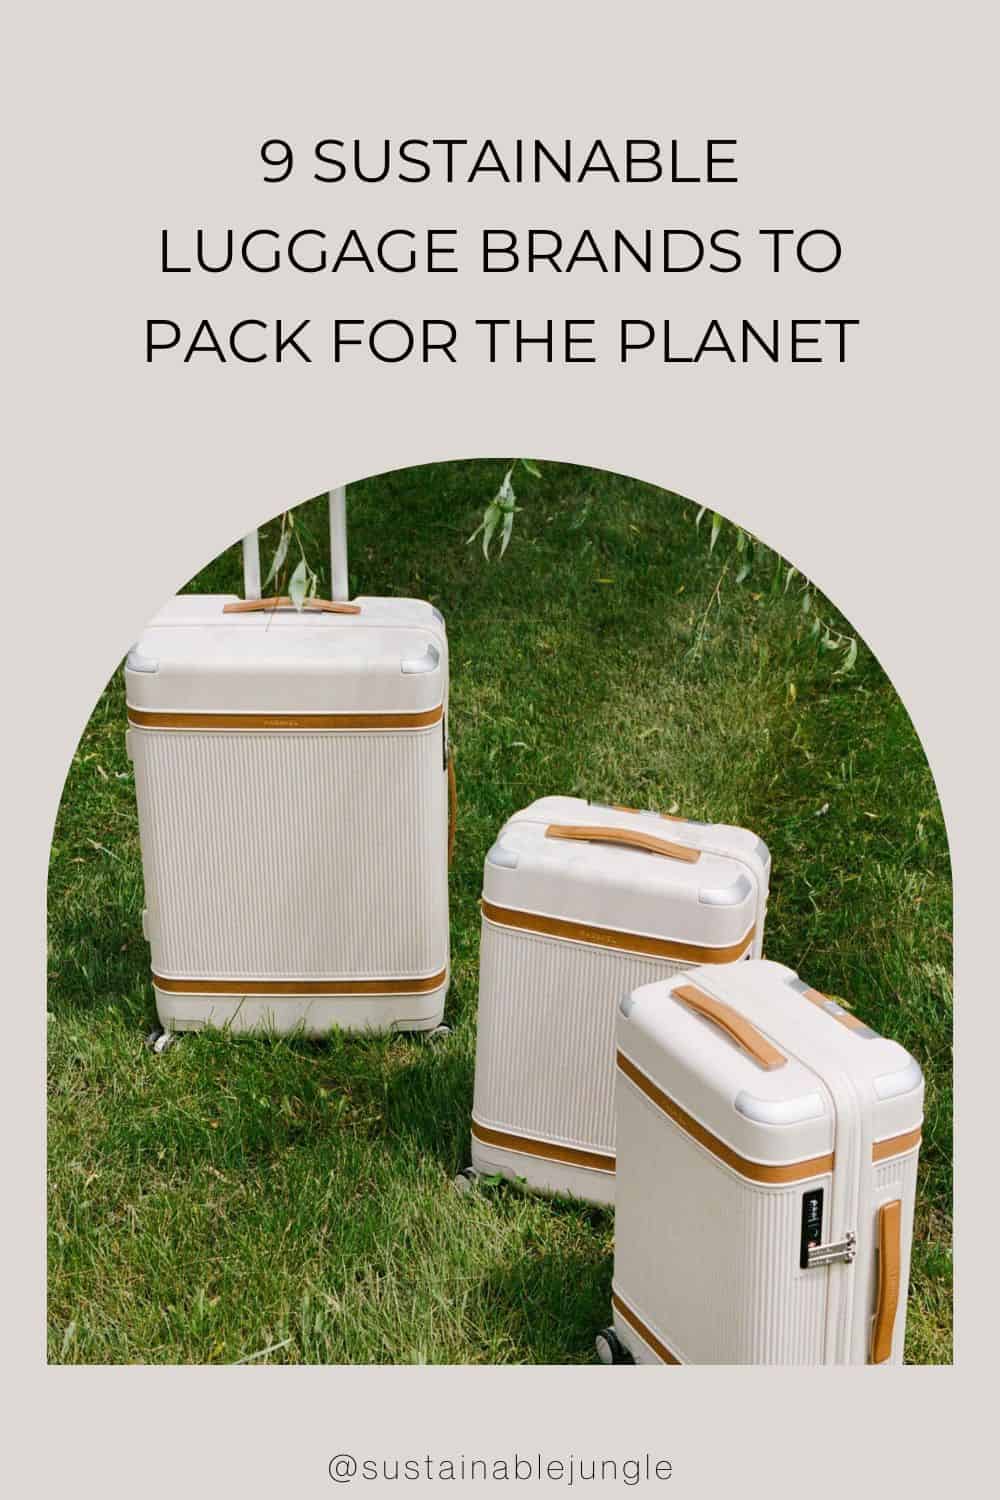 9 Sustainable Luggage Brands To Pack For The Planet Image by Paravel #sustainableluggage #ecofriendlyluggage #sustainablecarryonluggage #sustainablesuitcases #ecofriendlyluggagebrands #ecofriendlyrecycledluggage #sustainablejungle